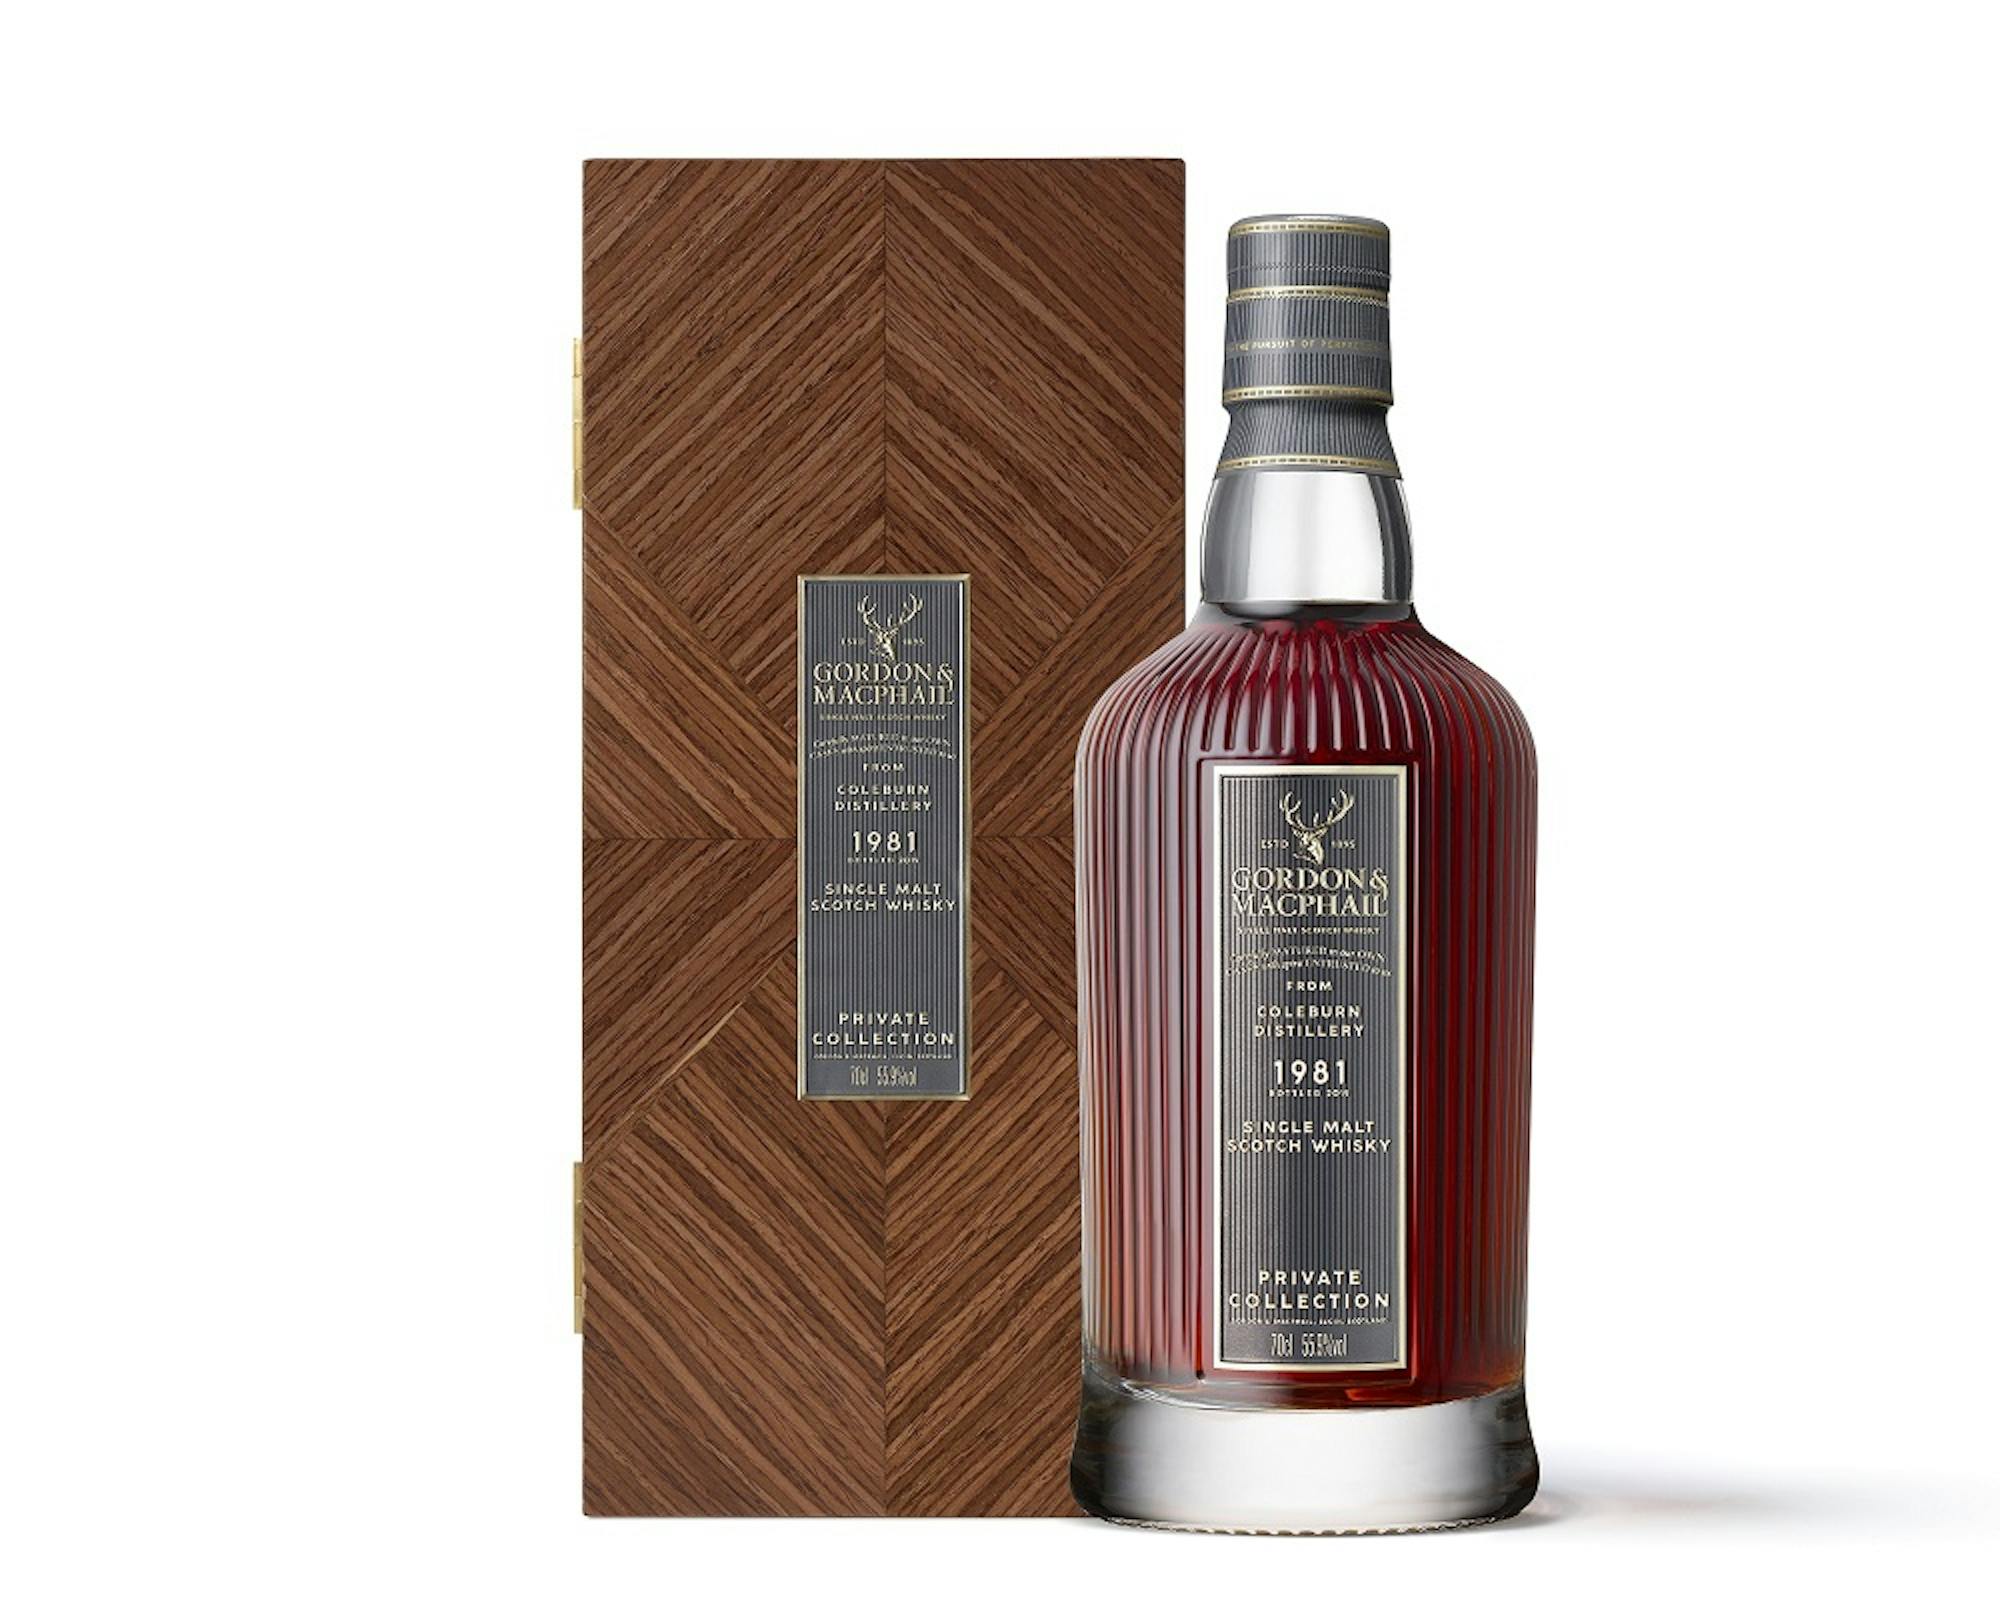 Whisky creator Gordon & MacPhail releases rare Coleburn single malt in Spring Collection